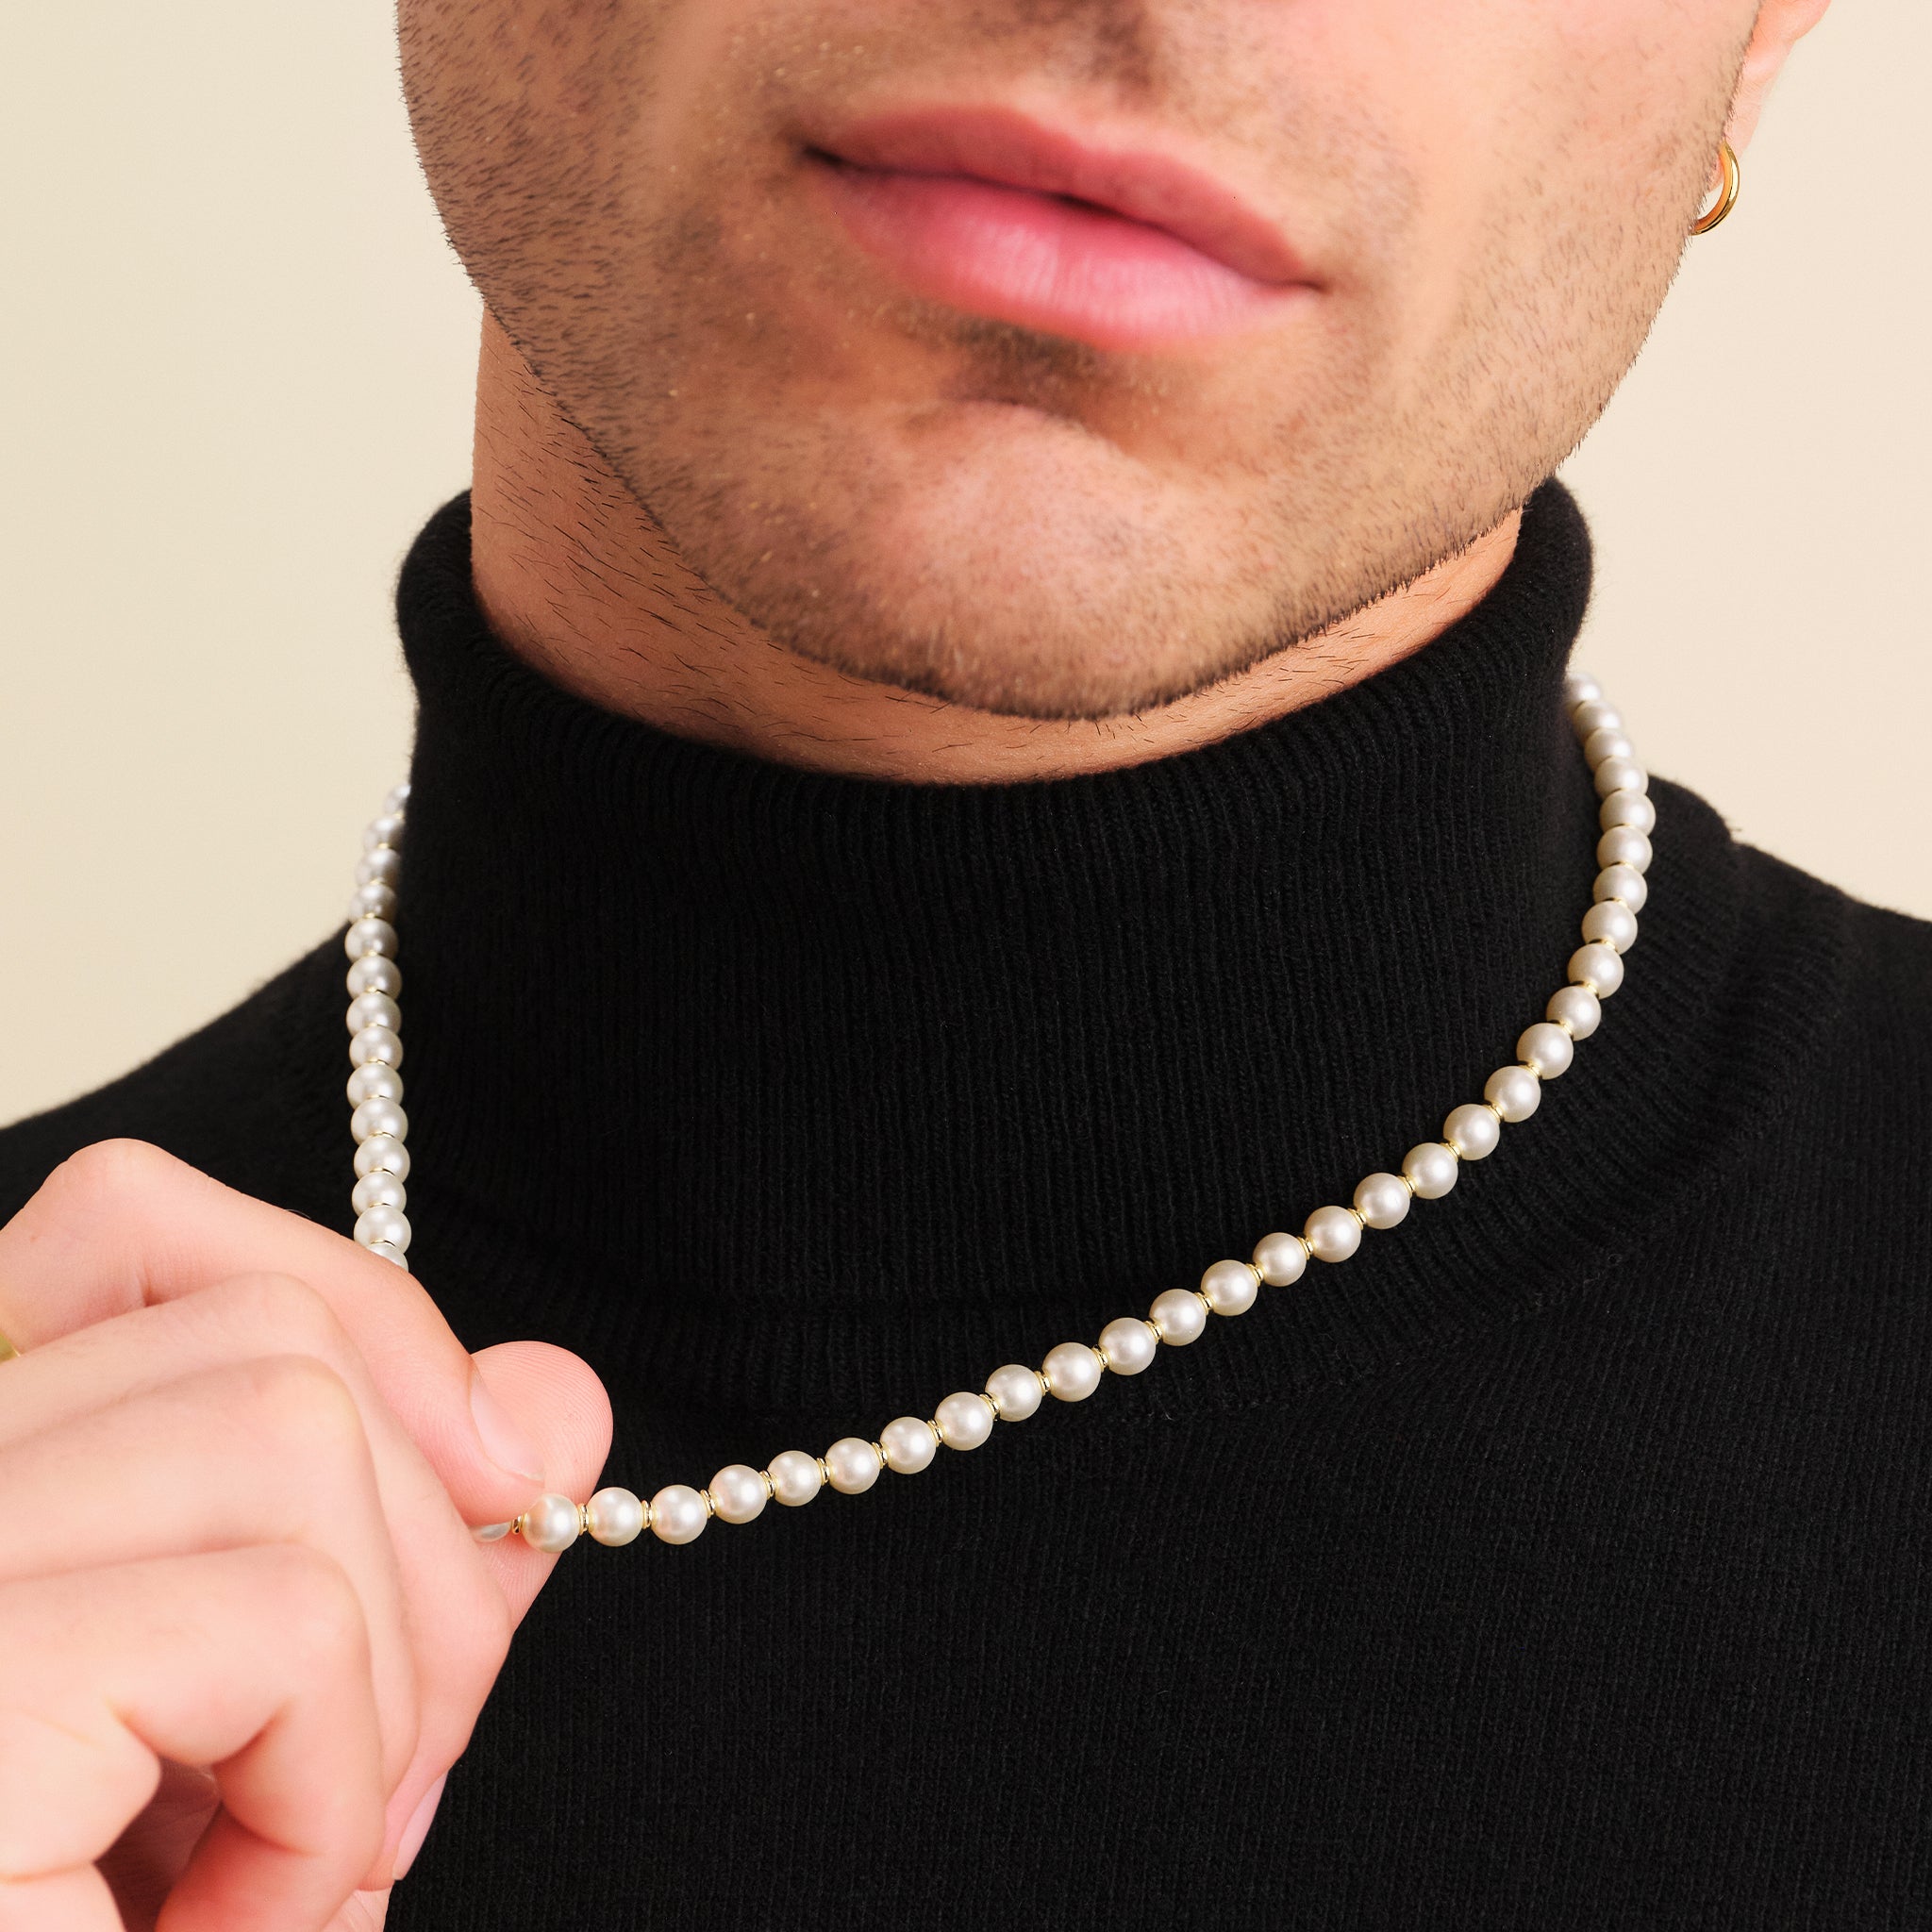 Mens Pearl Necklace With Contrast Colors | Mens pearl necklace, Pearl  necklace, Contrasting colors